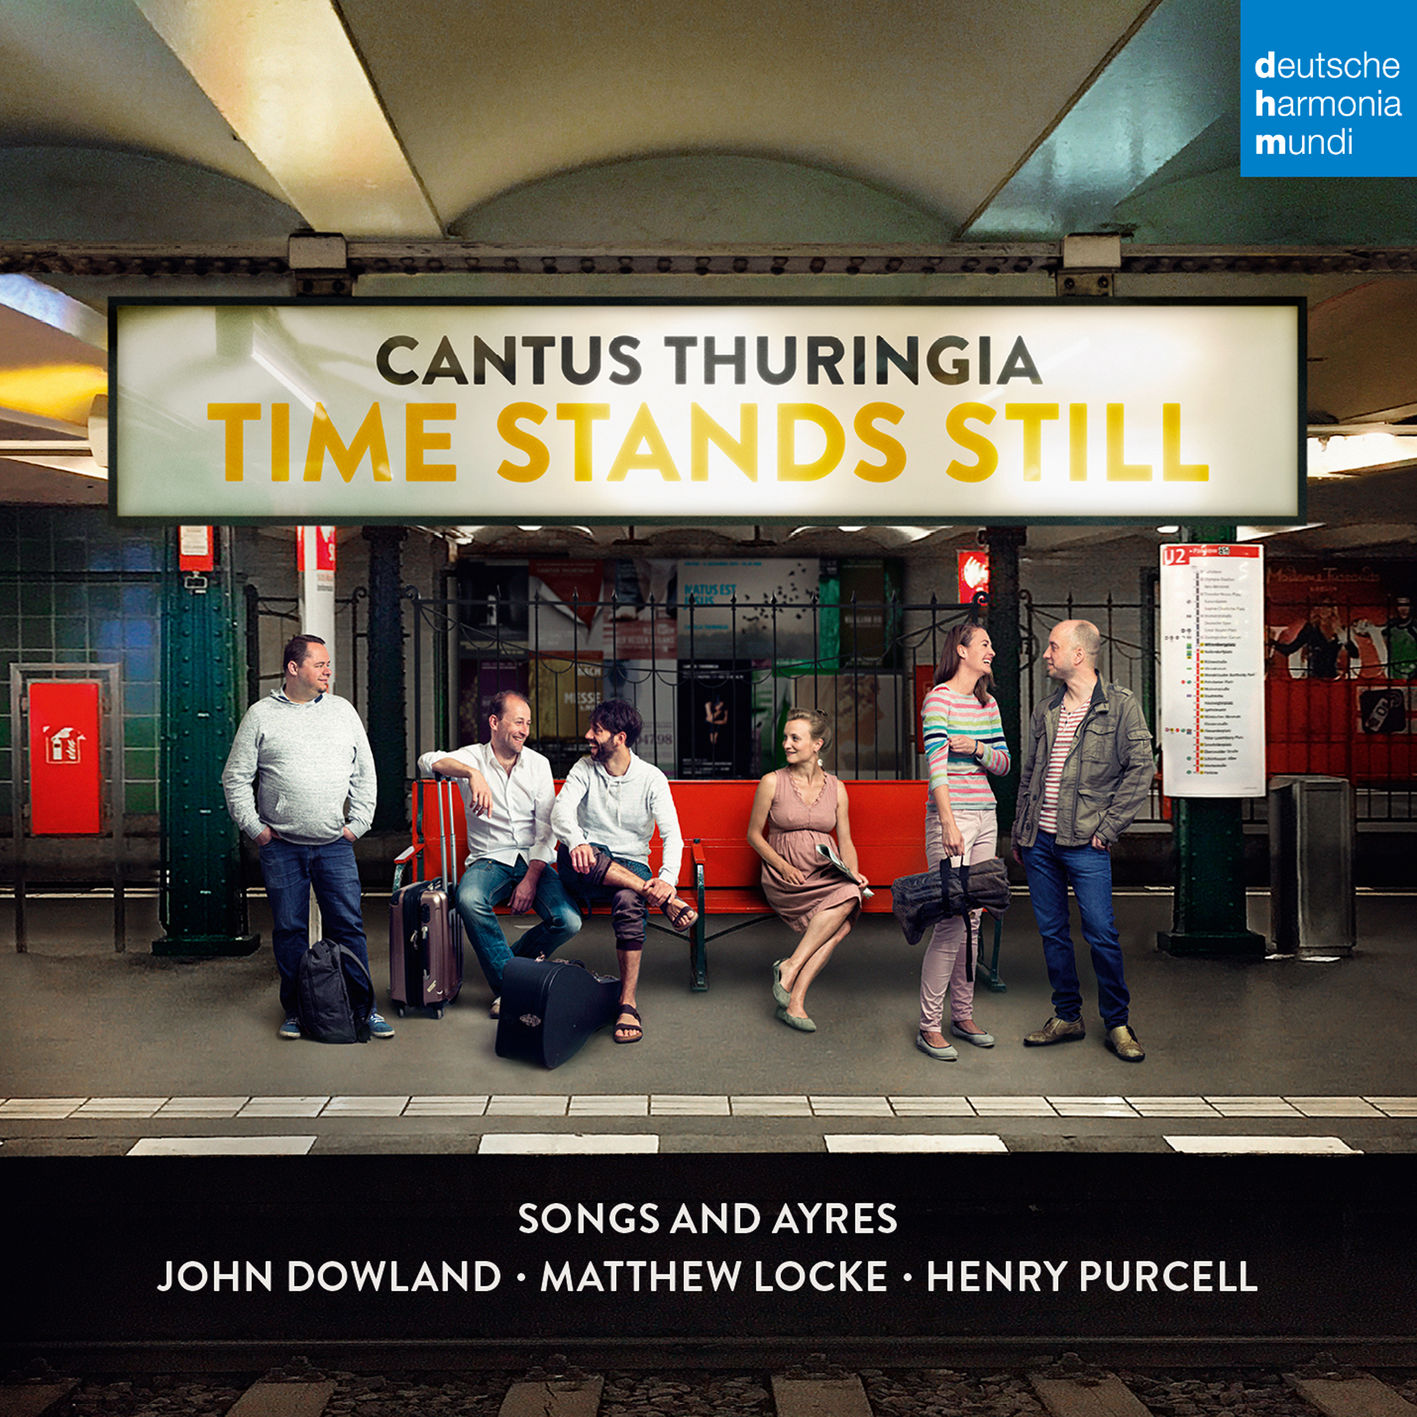 Cantus Thuringia - Time Stands Still (2018) [FLAC 24bit/96kHz]